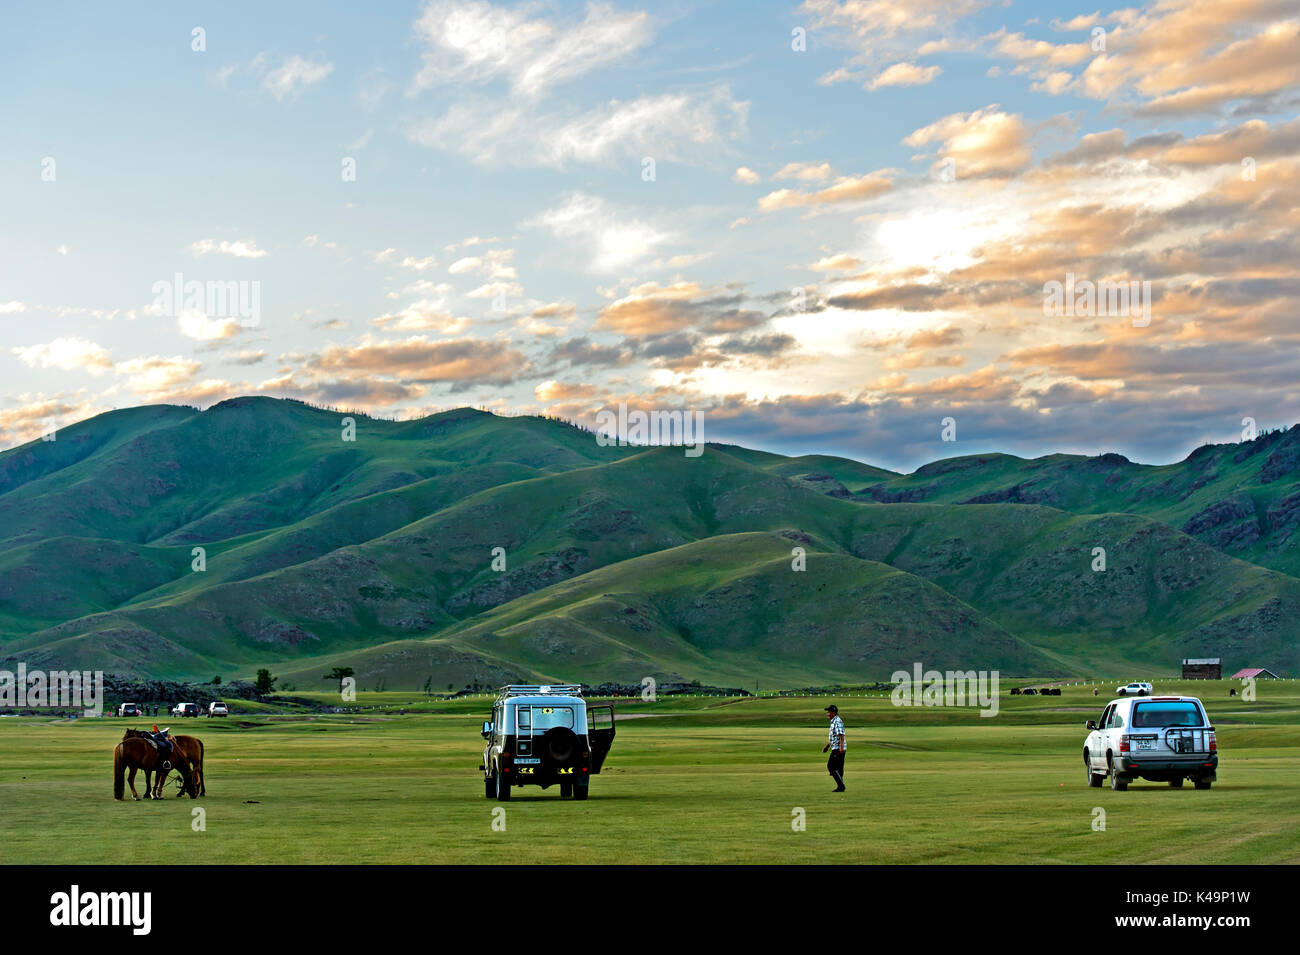 Vast Steppe Landscape Of The Orkhon Valley, Mongolia Stock Photo